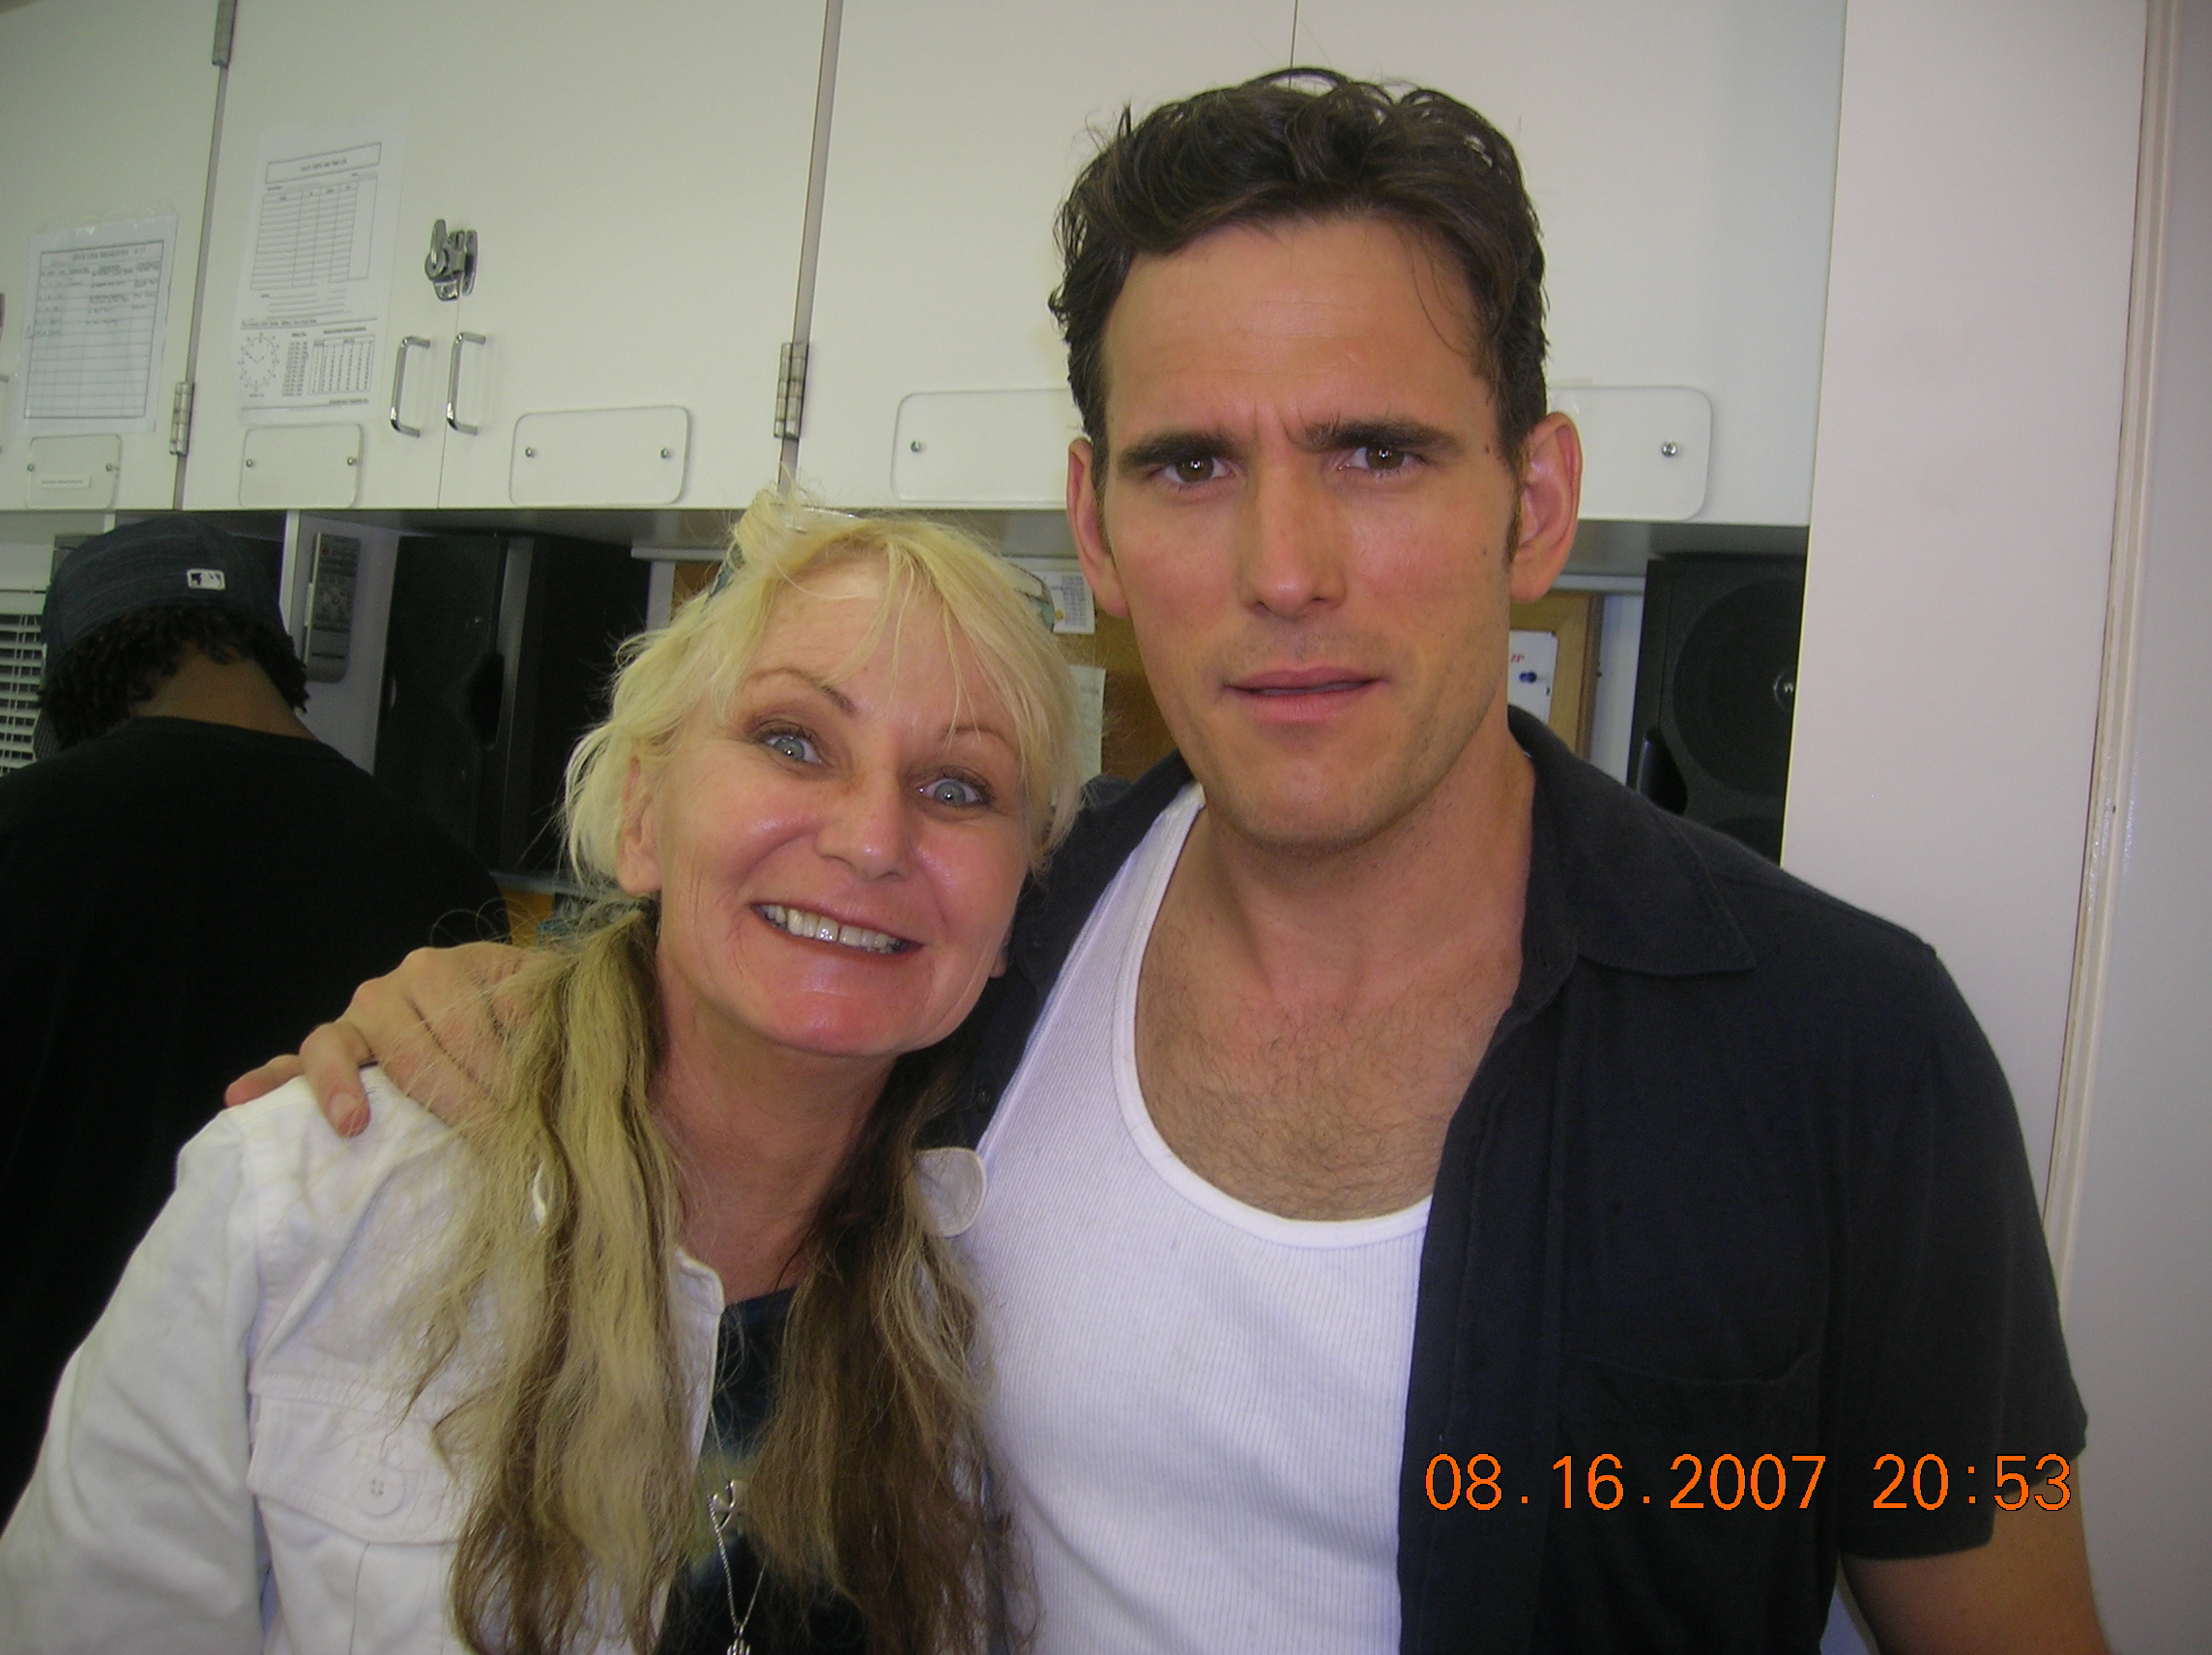 RAMONA AND MATT DILLION ON 3RD FILM TO WORK TOGETHER ON 'OLD DOGS' FILMED IN NY AND CONNETICUT.LOVE MATT'S HAIR ...